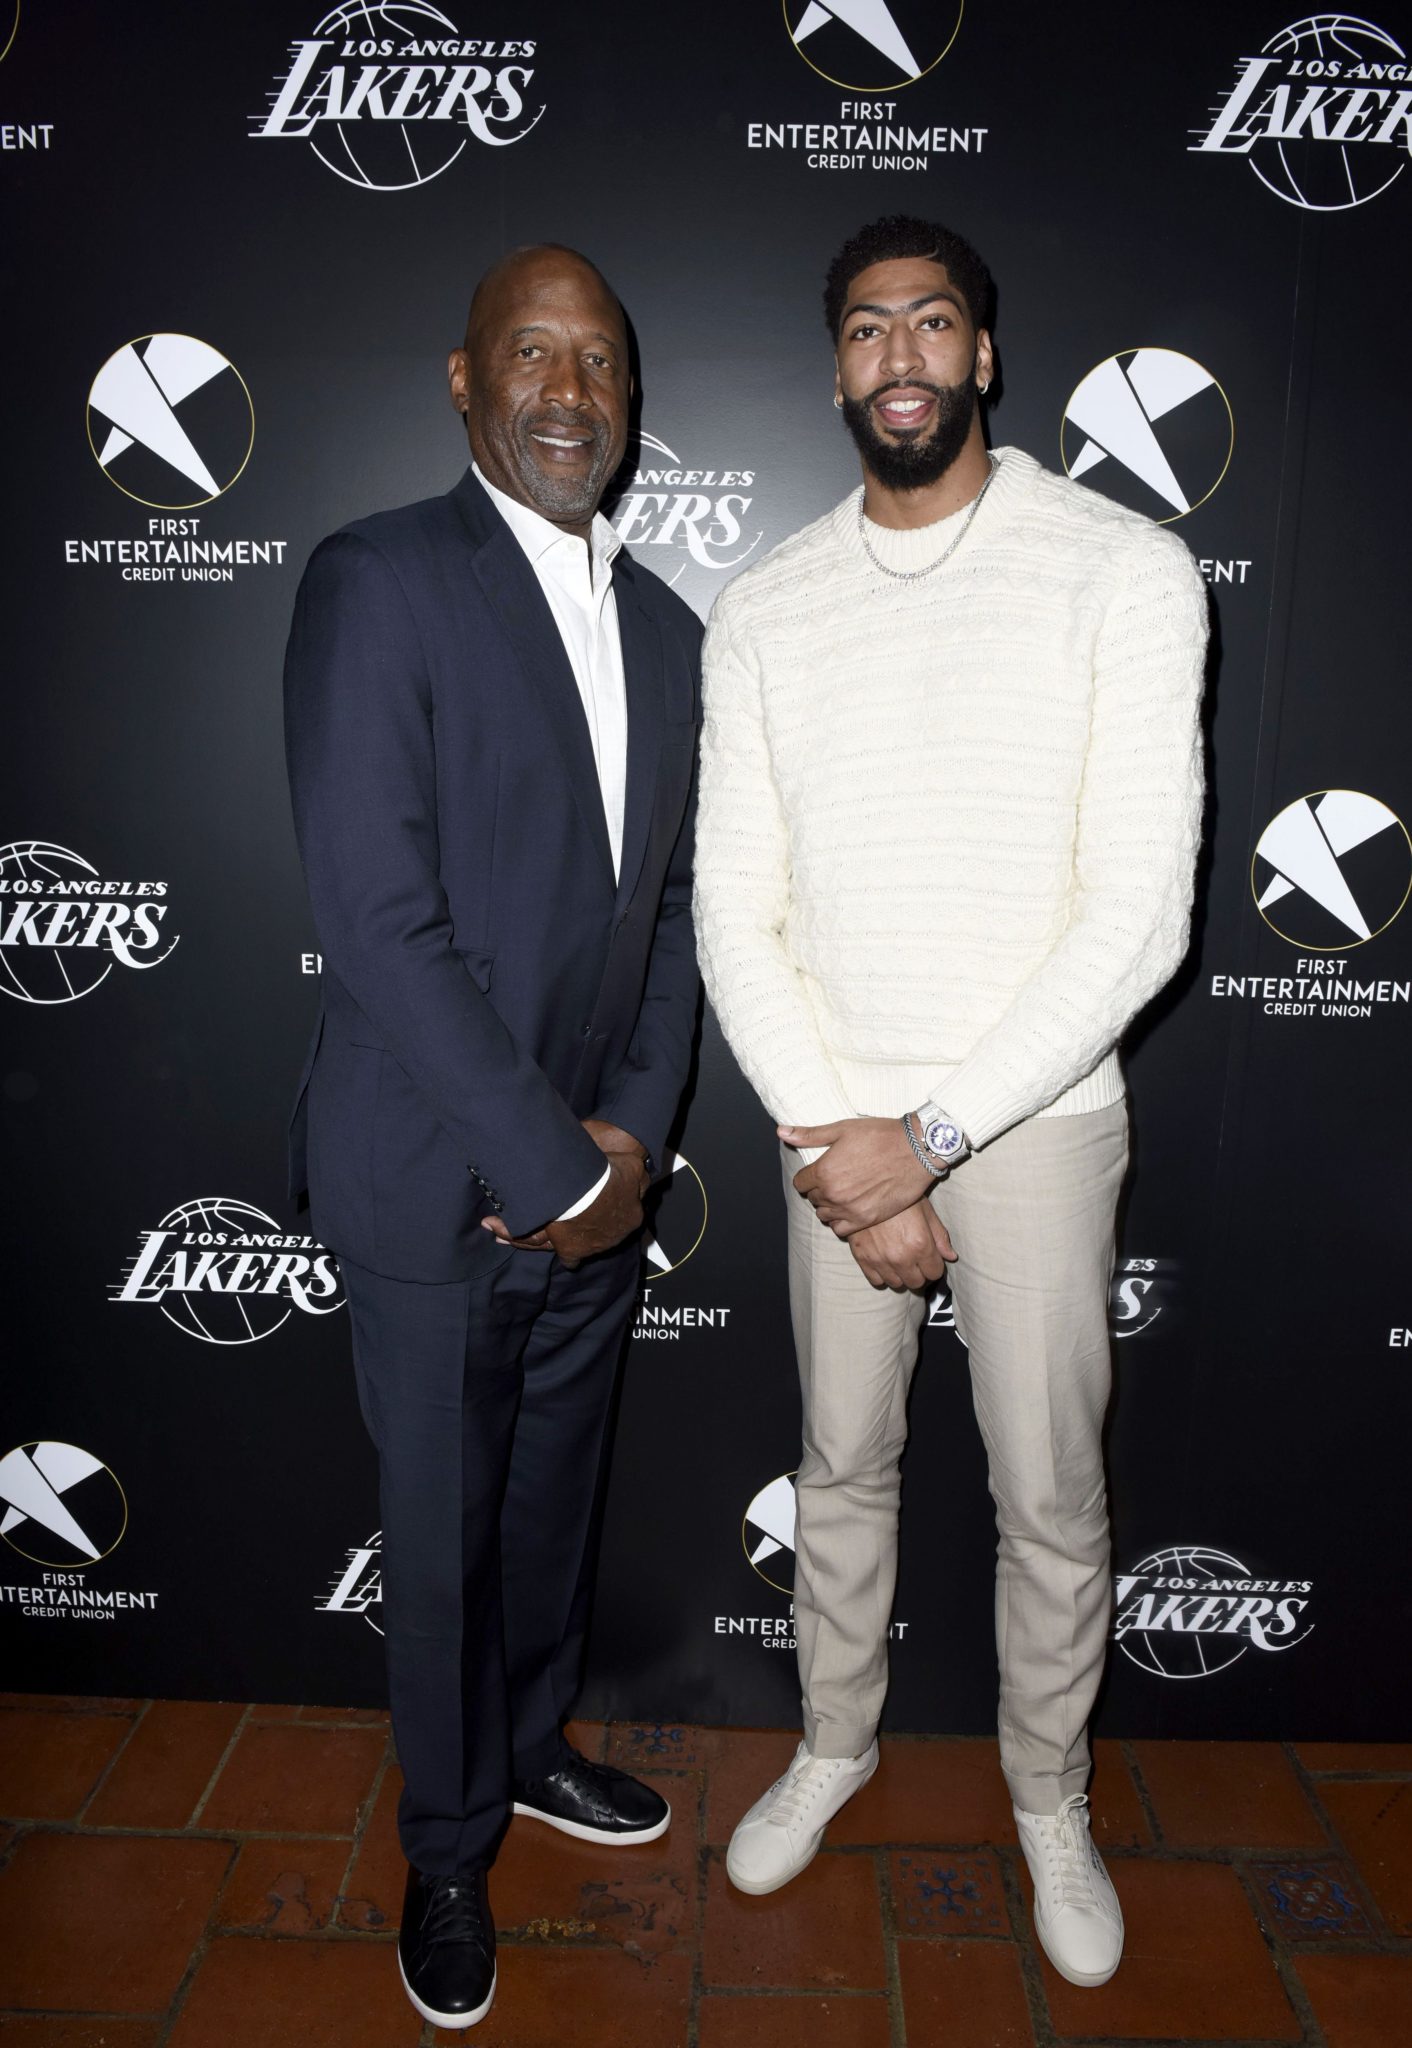 LOS ANGELES, CALIFORNIA - MARCH 4: Lakers legend James Worthy and  Lakers star Anthony Davis attend the First Entertainment x Los Angeles Lakers and Anthony Davis Partnership Launch Event at The Theatre at Ace Hotel on March 4, 2020 in Los Angeles, California.  (Photo by Vivien Killilea/Getty Images for First Entertainment)